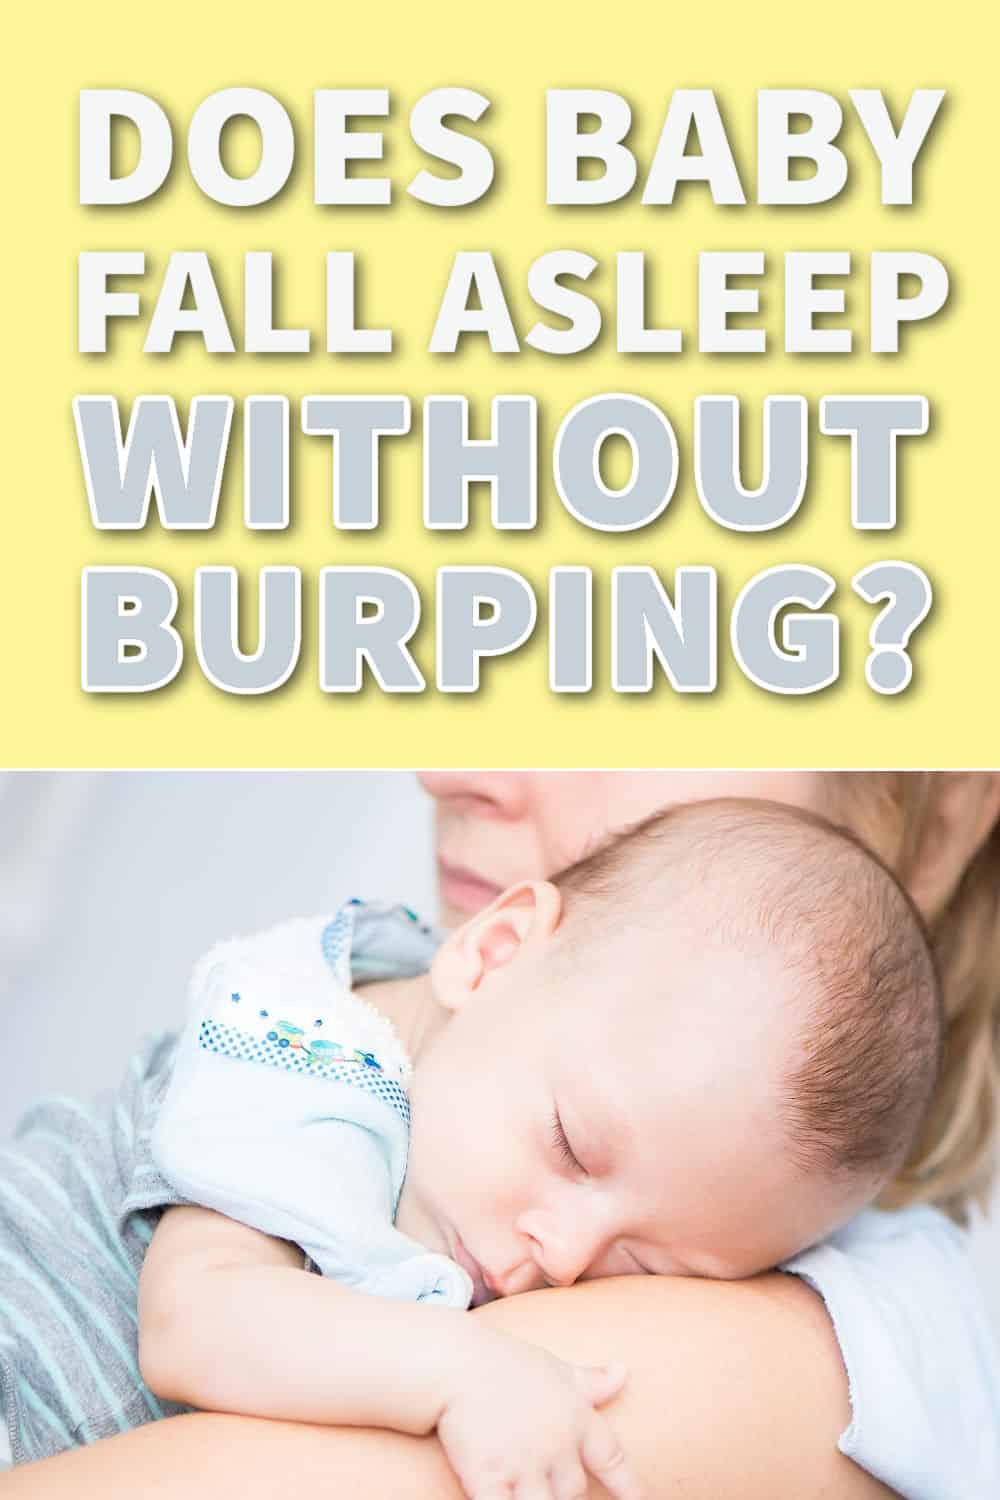 Is it OK to put baby to sleep without burping? How to burp a sleeping baby